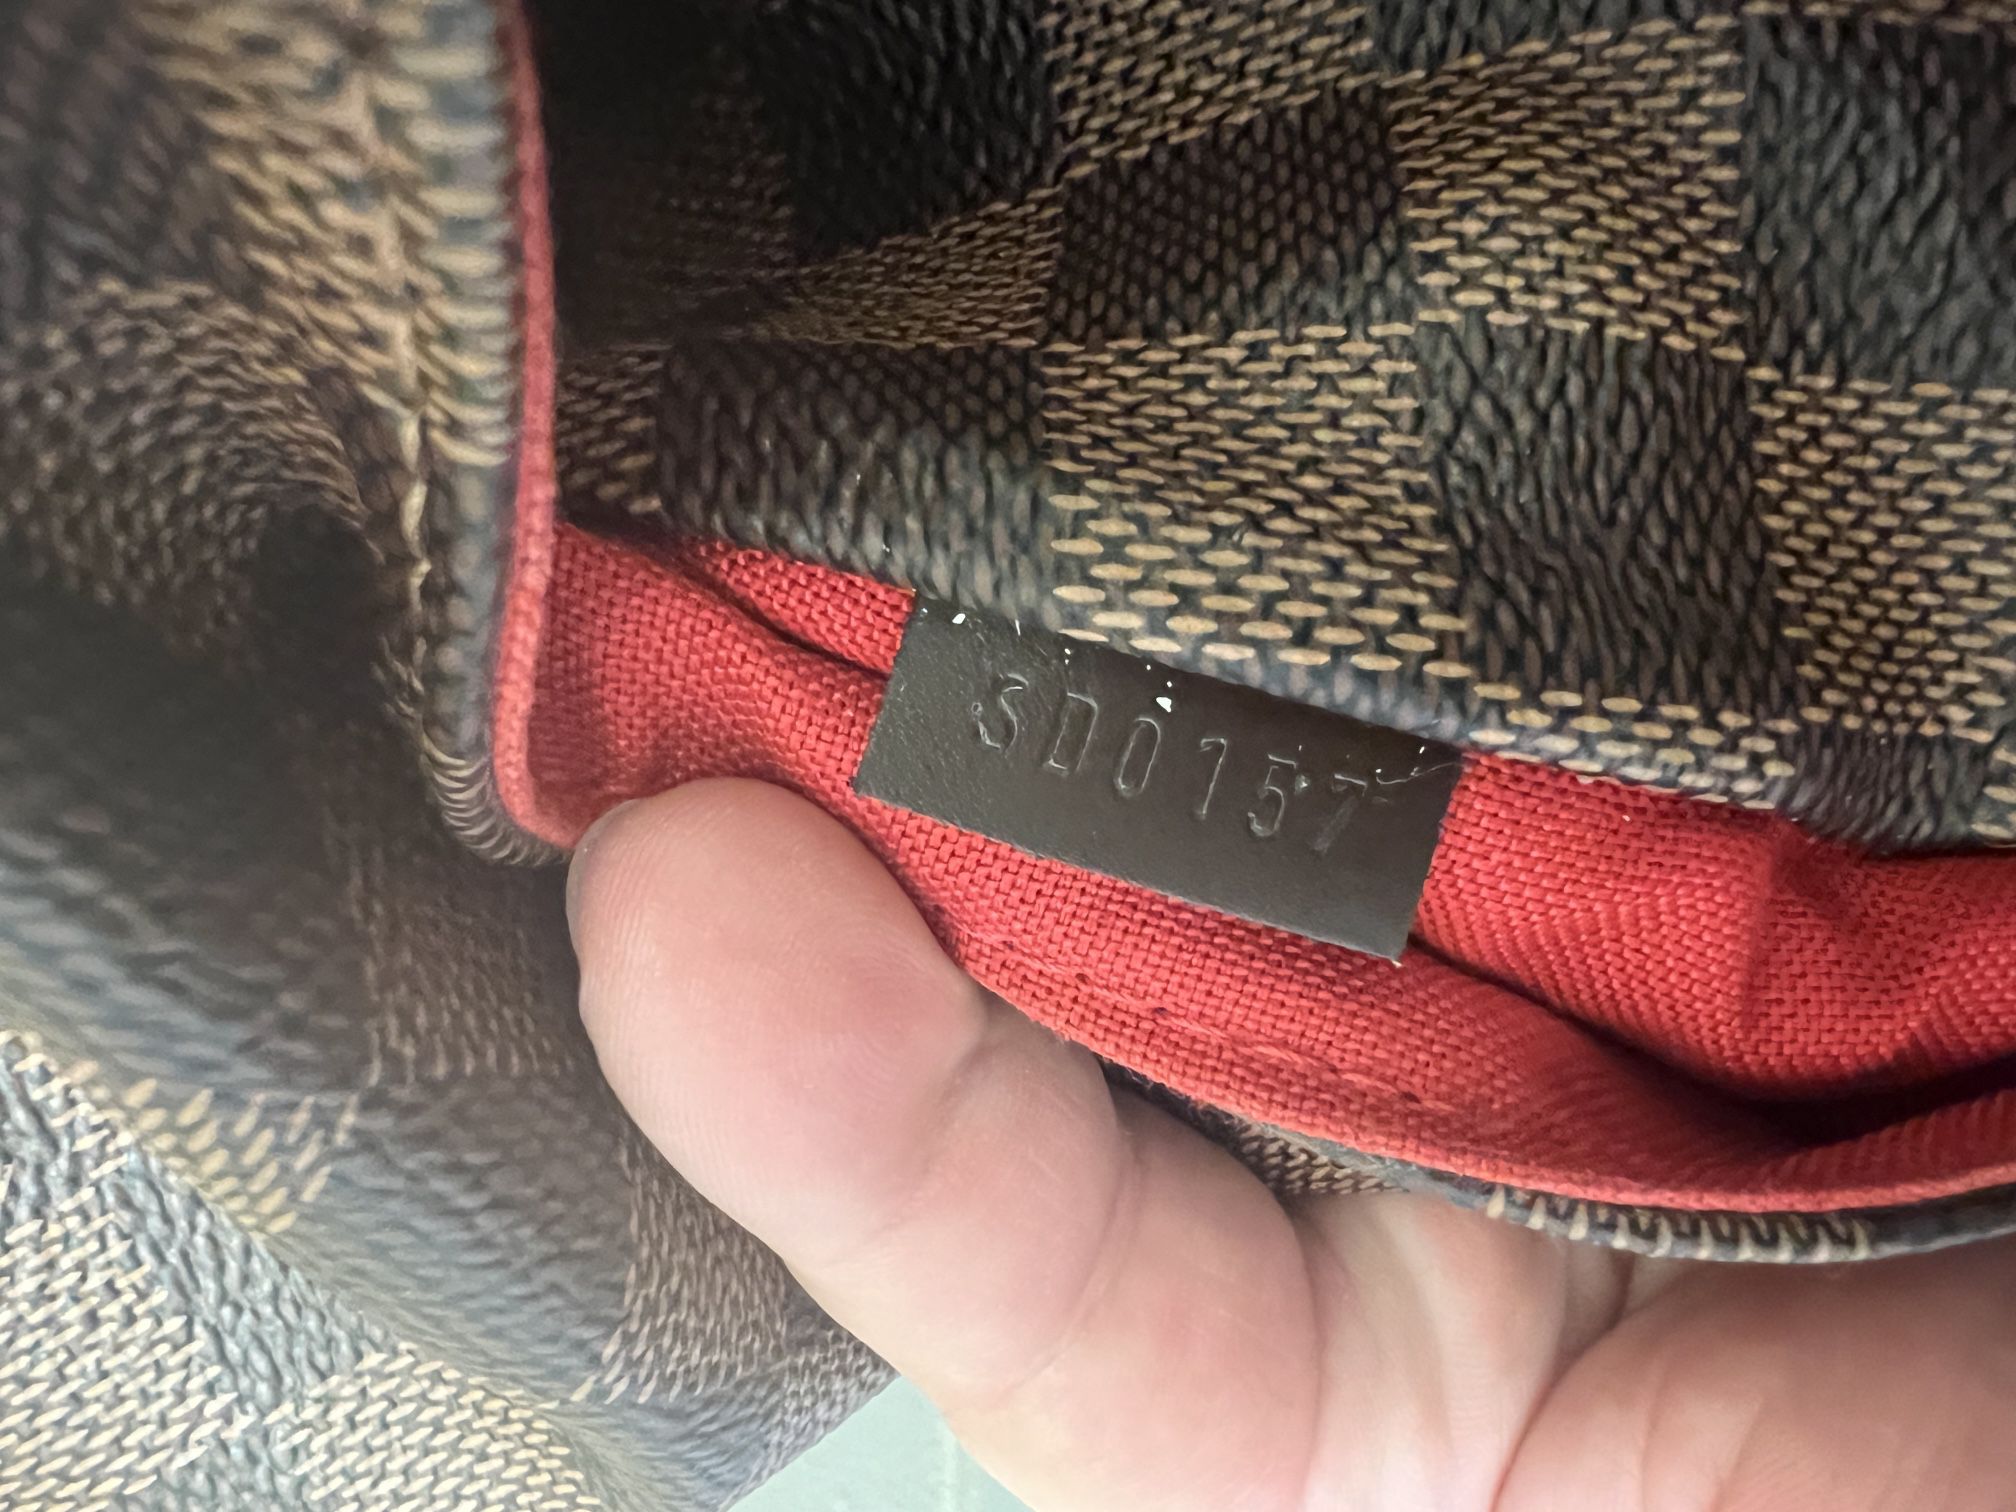 Authentic Louis Vuitton Alma BB Monogram - LIKE NEW WITH TAGS, BOX AND DUST  BAG for Sale in Fillmore, CA - OfferUp